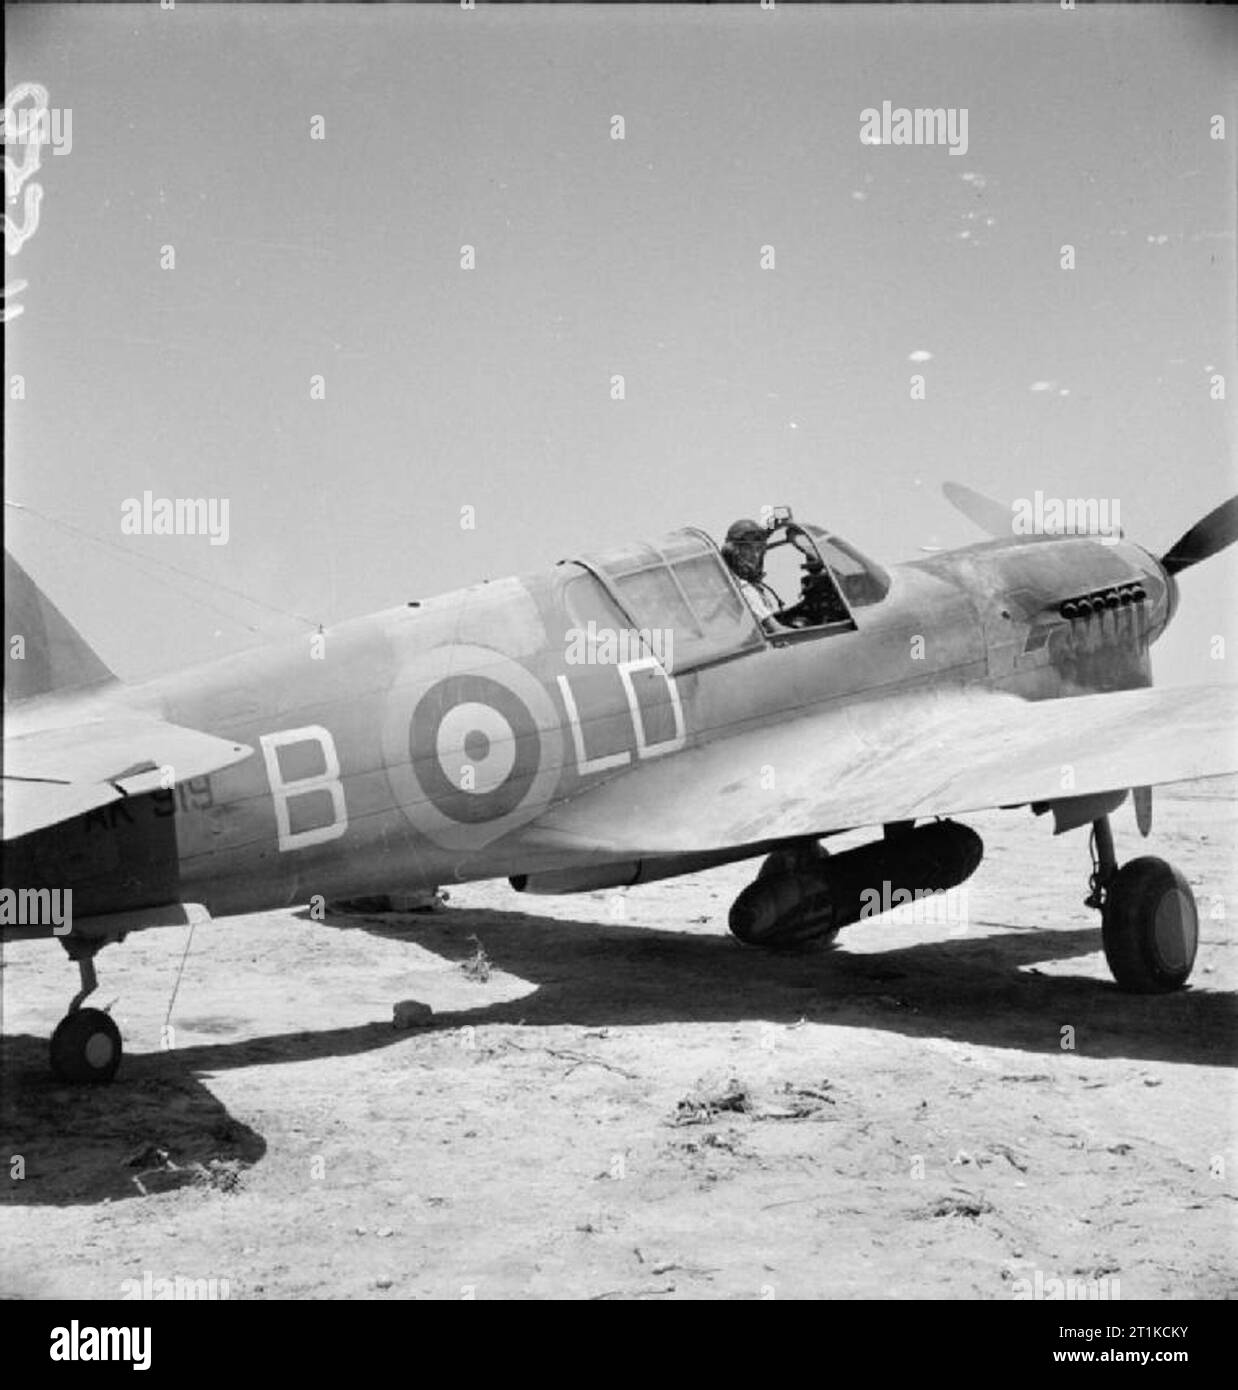 Royal Air Force- Operations in the Middle East and North Africa, 1940-1943. Squadron Leader M T Judd, Officer Commanding No. 250 Squadron RAF, sitting in the cockpit of Curtiss Kittyhawk Mark I, AK919 'LD-B', at LG 91, Egypt. It was in this aircraft that Judd shot down a Junkers Ju 87 over LG 21 on 8 July 1942, and damaged another on 19 July. Note the red arrow unit marking over the exhaust stubs on the engine cowling. Stock Photo